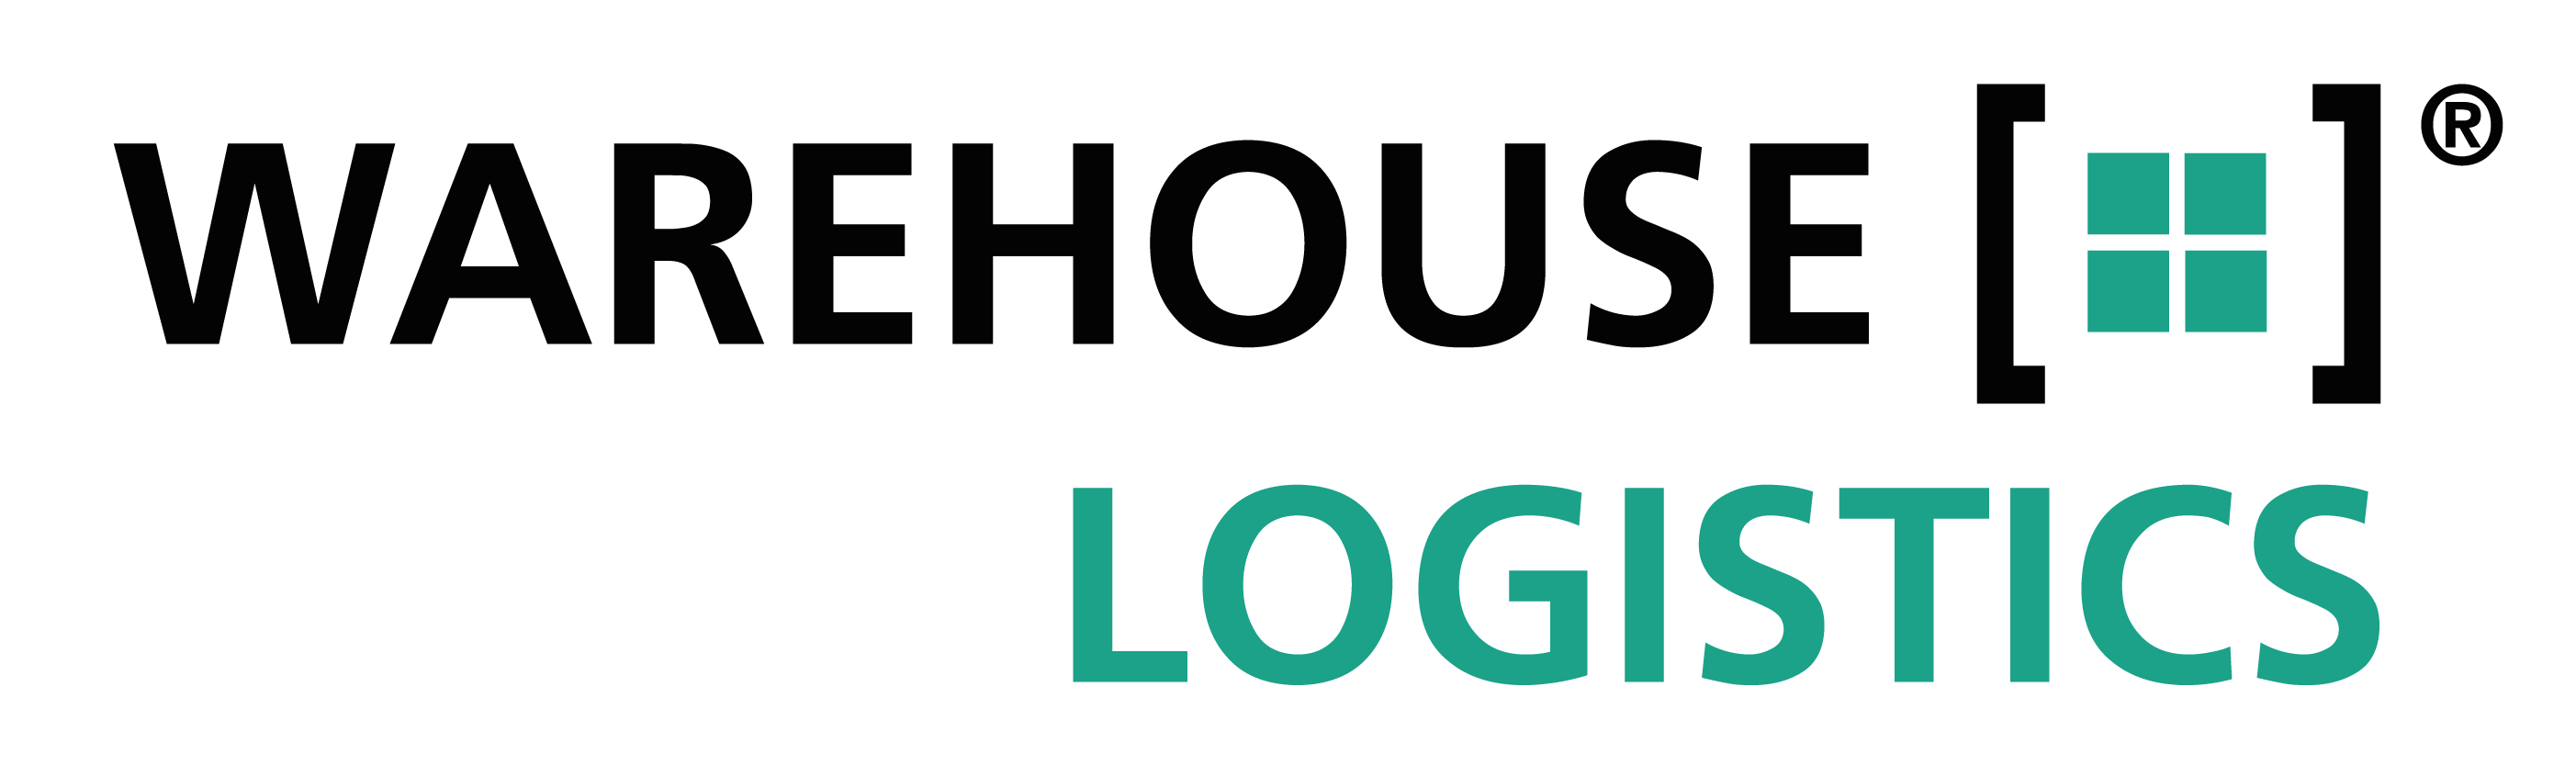 warehouse-logistics: Logistics IT Innovation Forum: Innovative event in cooperation with the Fraunhofer IML | warehouse logistics